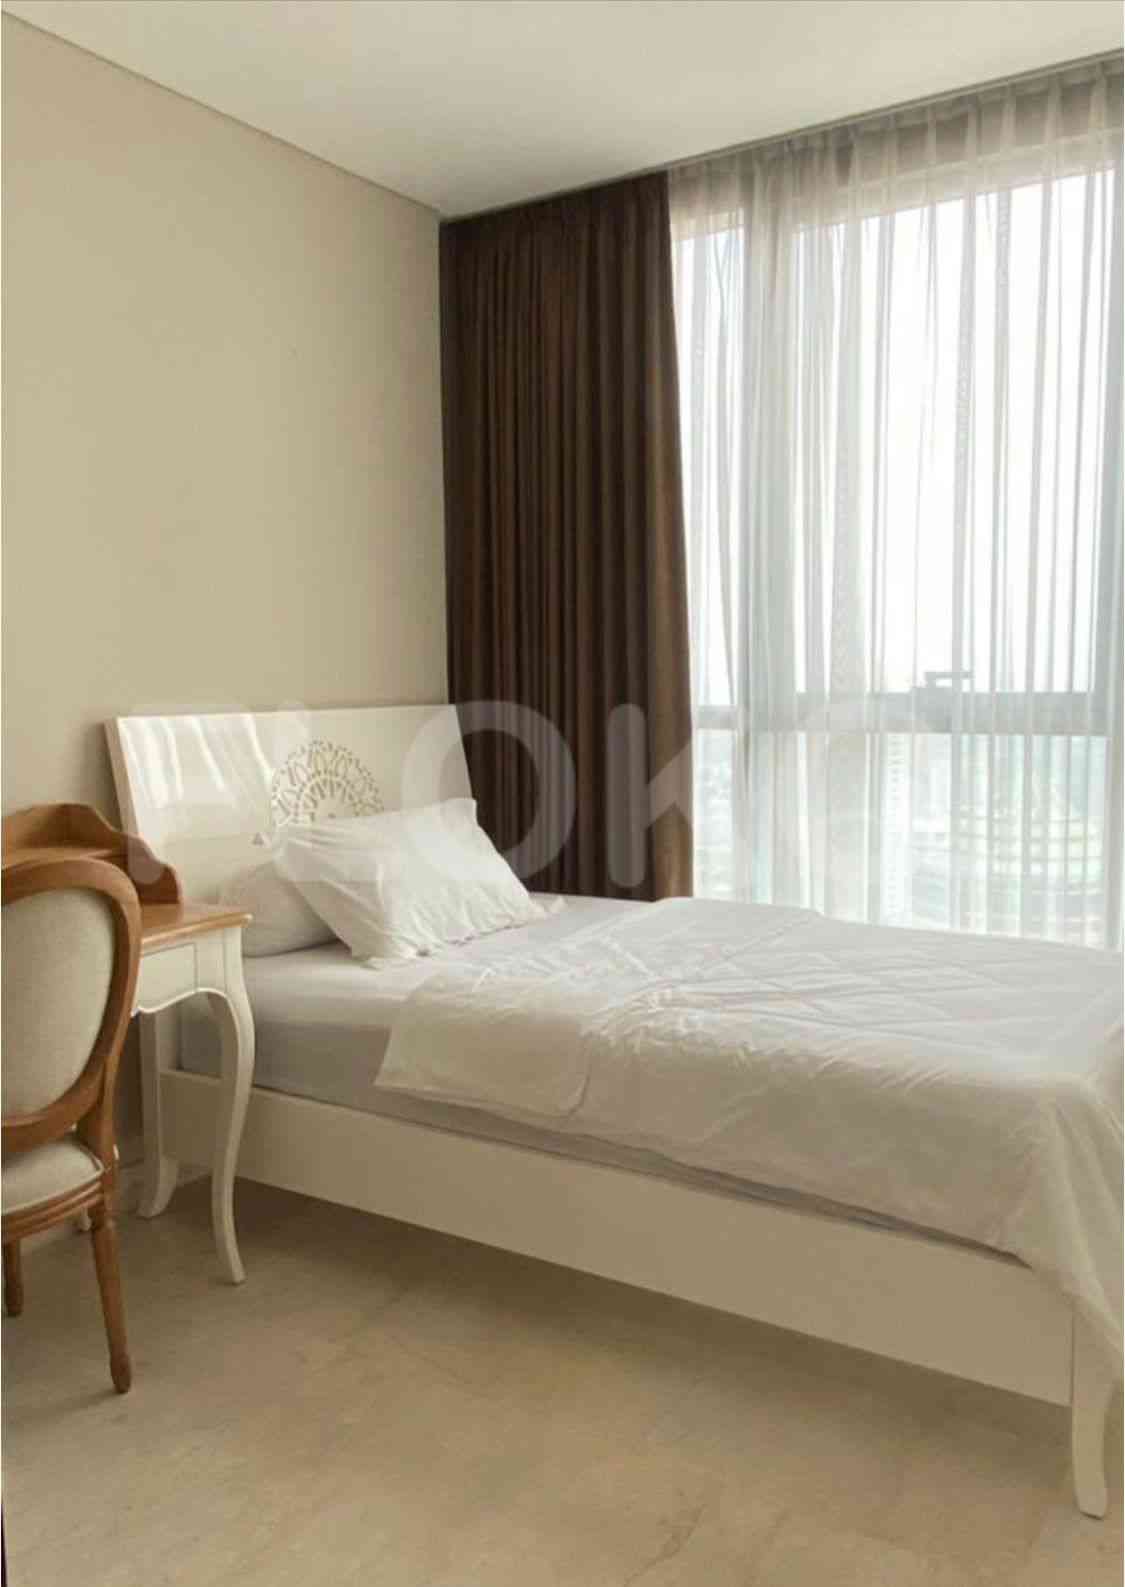 3 Bedroom on 24th Floor for Rent in Ciputra World 2 Apartment - fku000 2